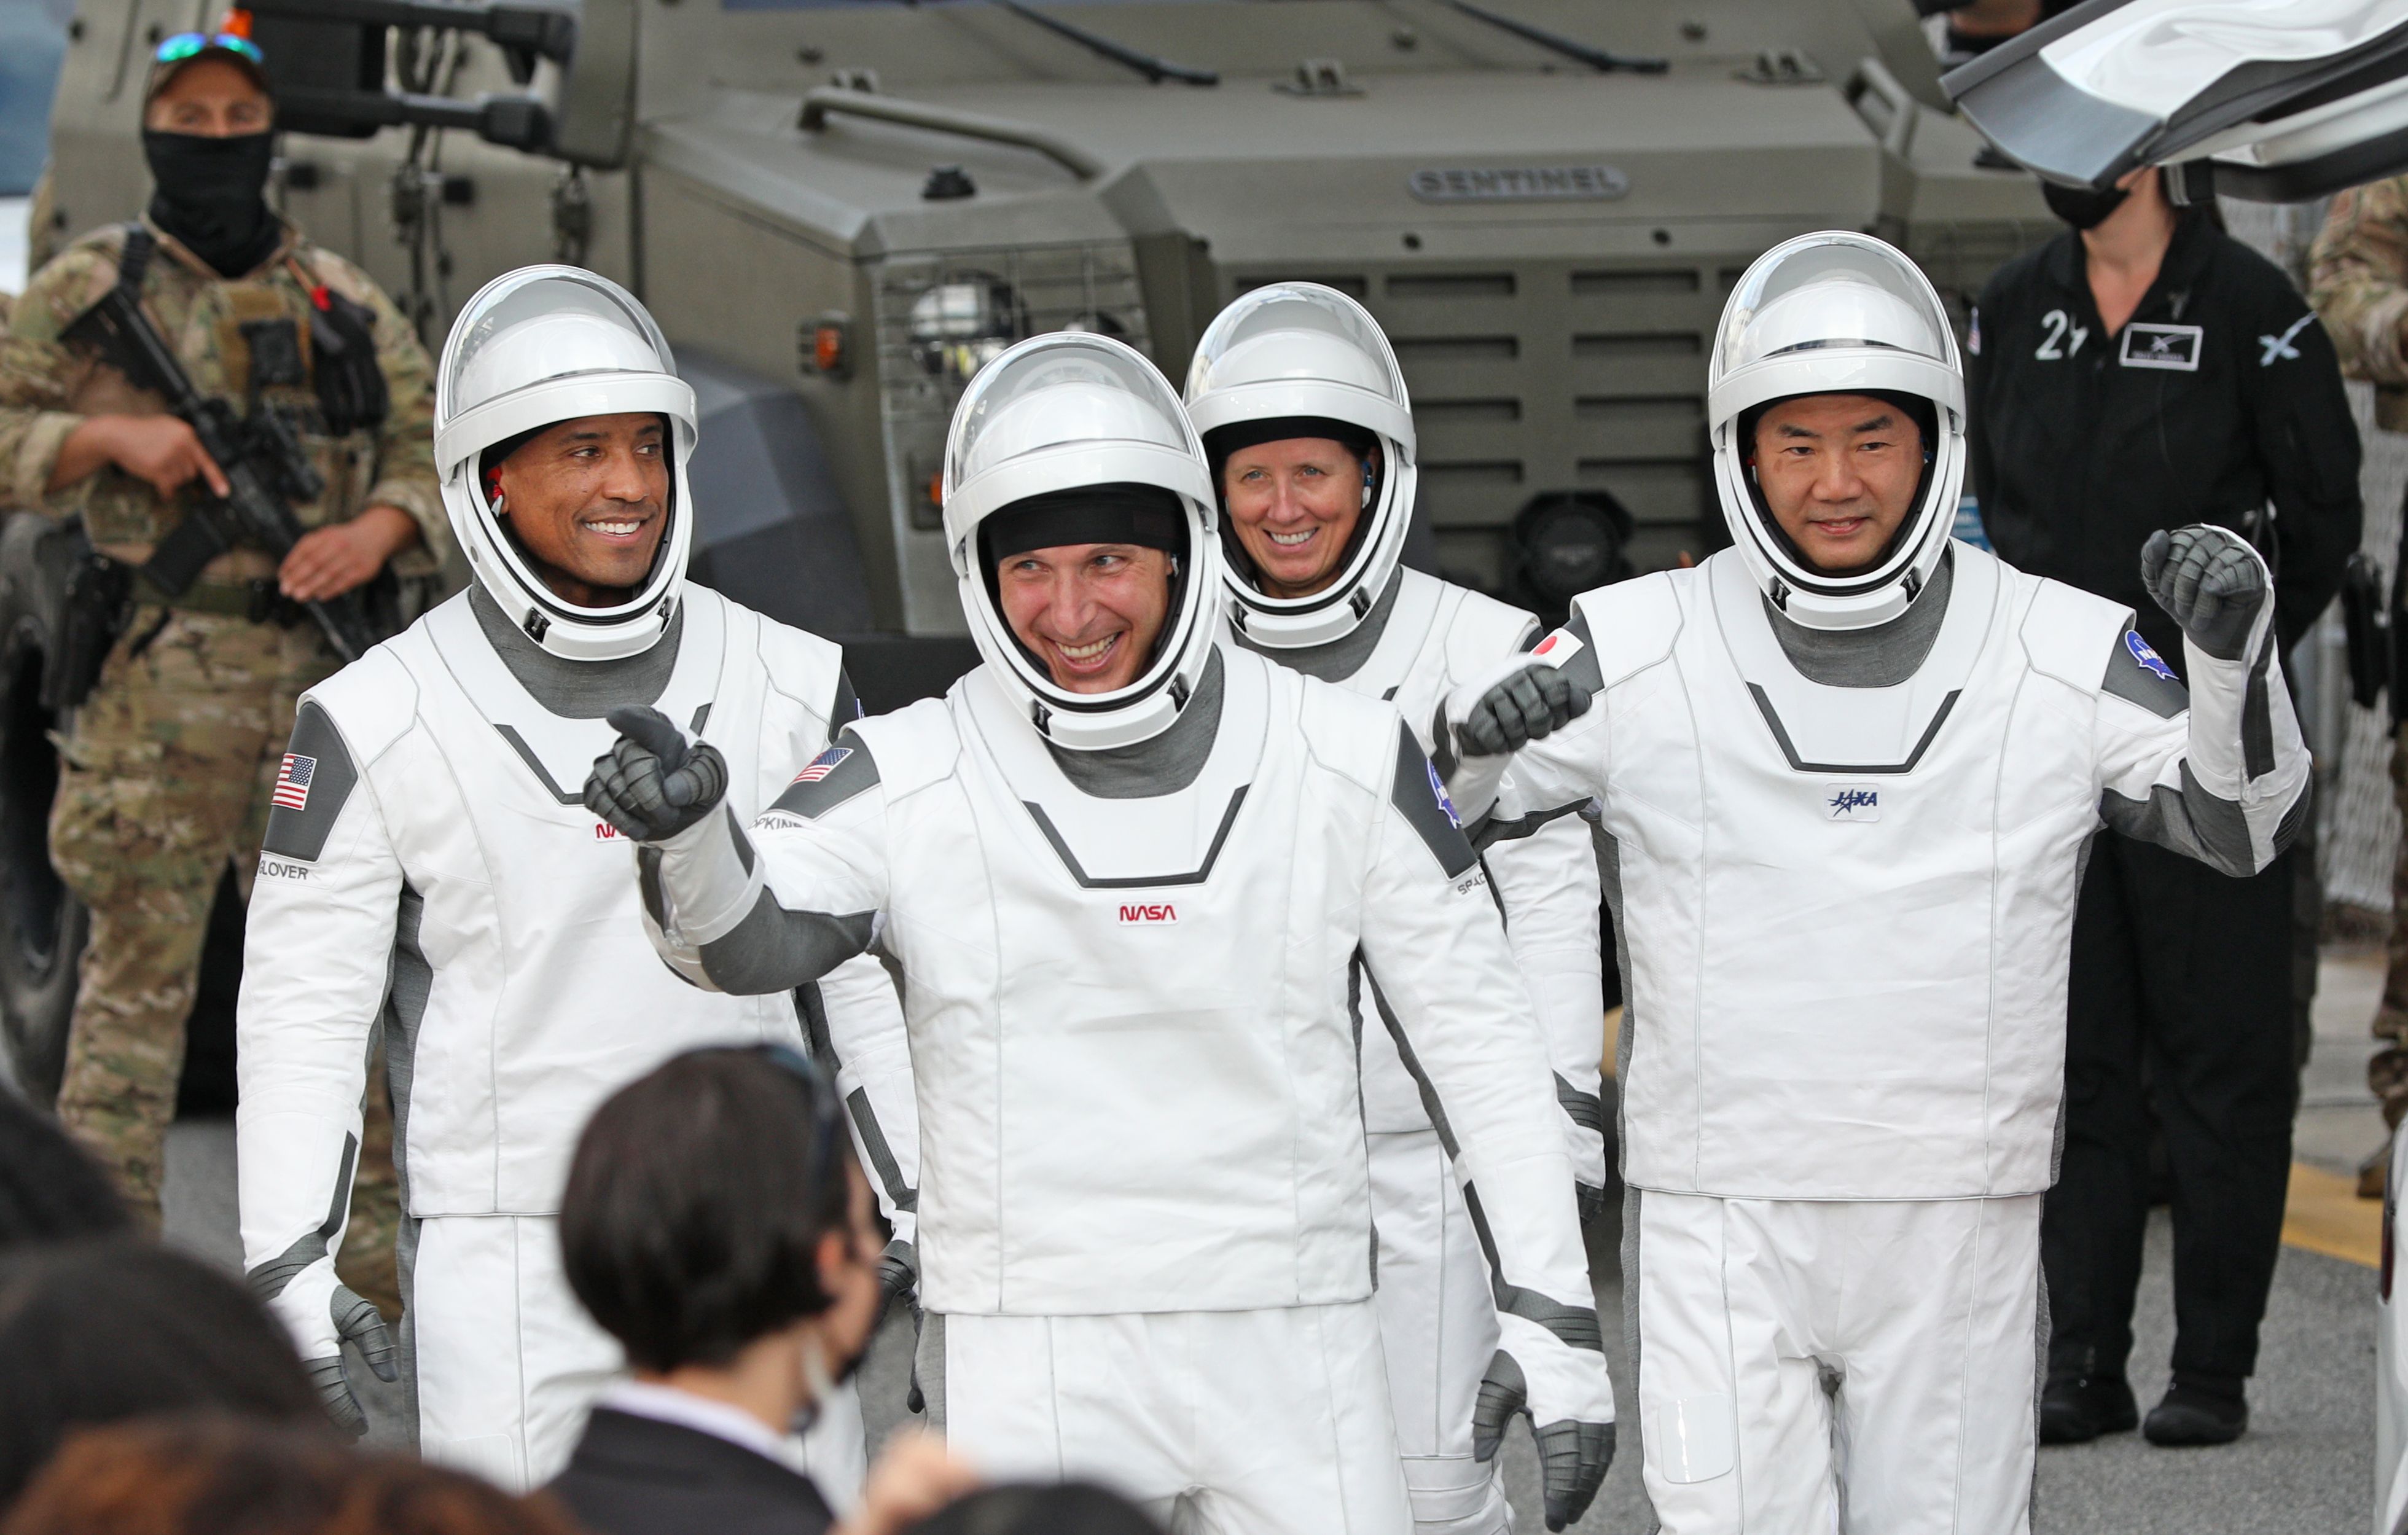 Crew-1 mission astronauts (L to R) Victor Glover, Michael Hopkins, Shannon Walker and Japanese astronaut Soichi Noguchi, walk out of the Neil A. Armstrong Operations and Checkout Building en route to launch complex 39A at the Kennedy Space Center in Florida on November 15, 2020.